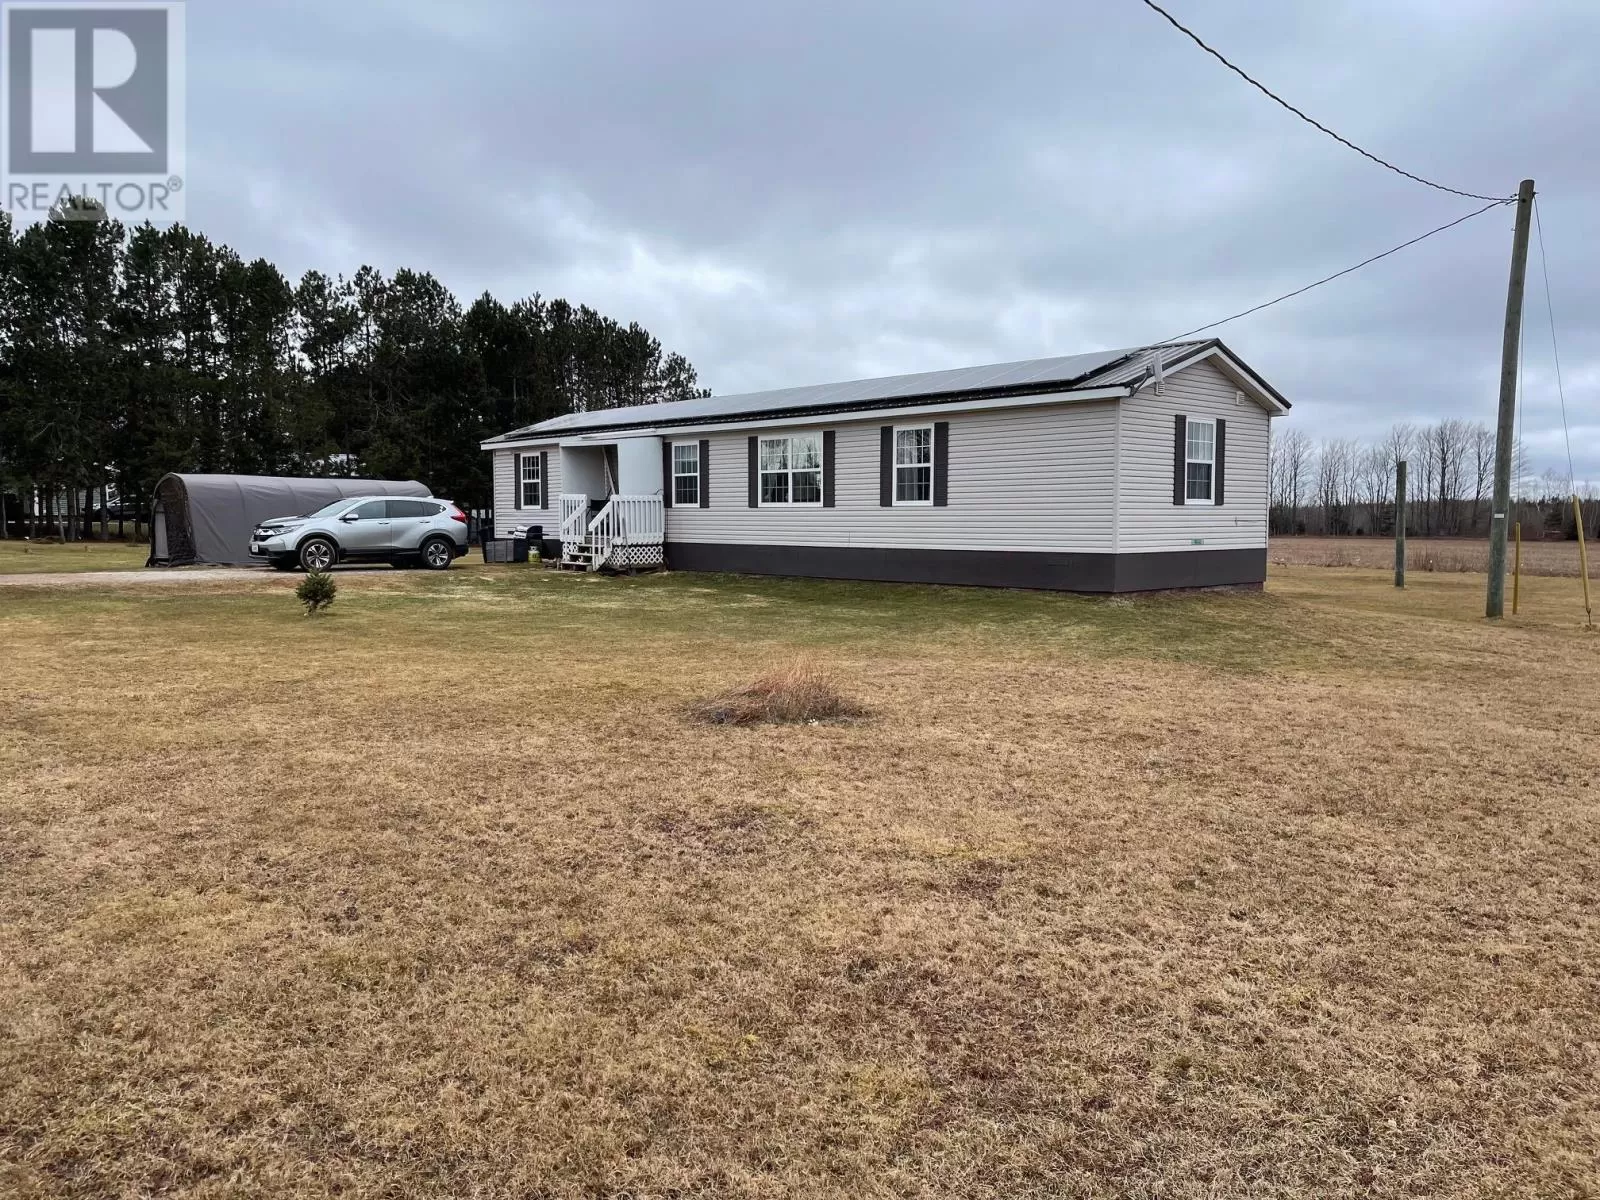 Mobile Home for rent: 334 Richards Road, Springhill, Prince Edward Island C0B 2C0